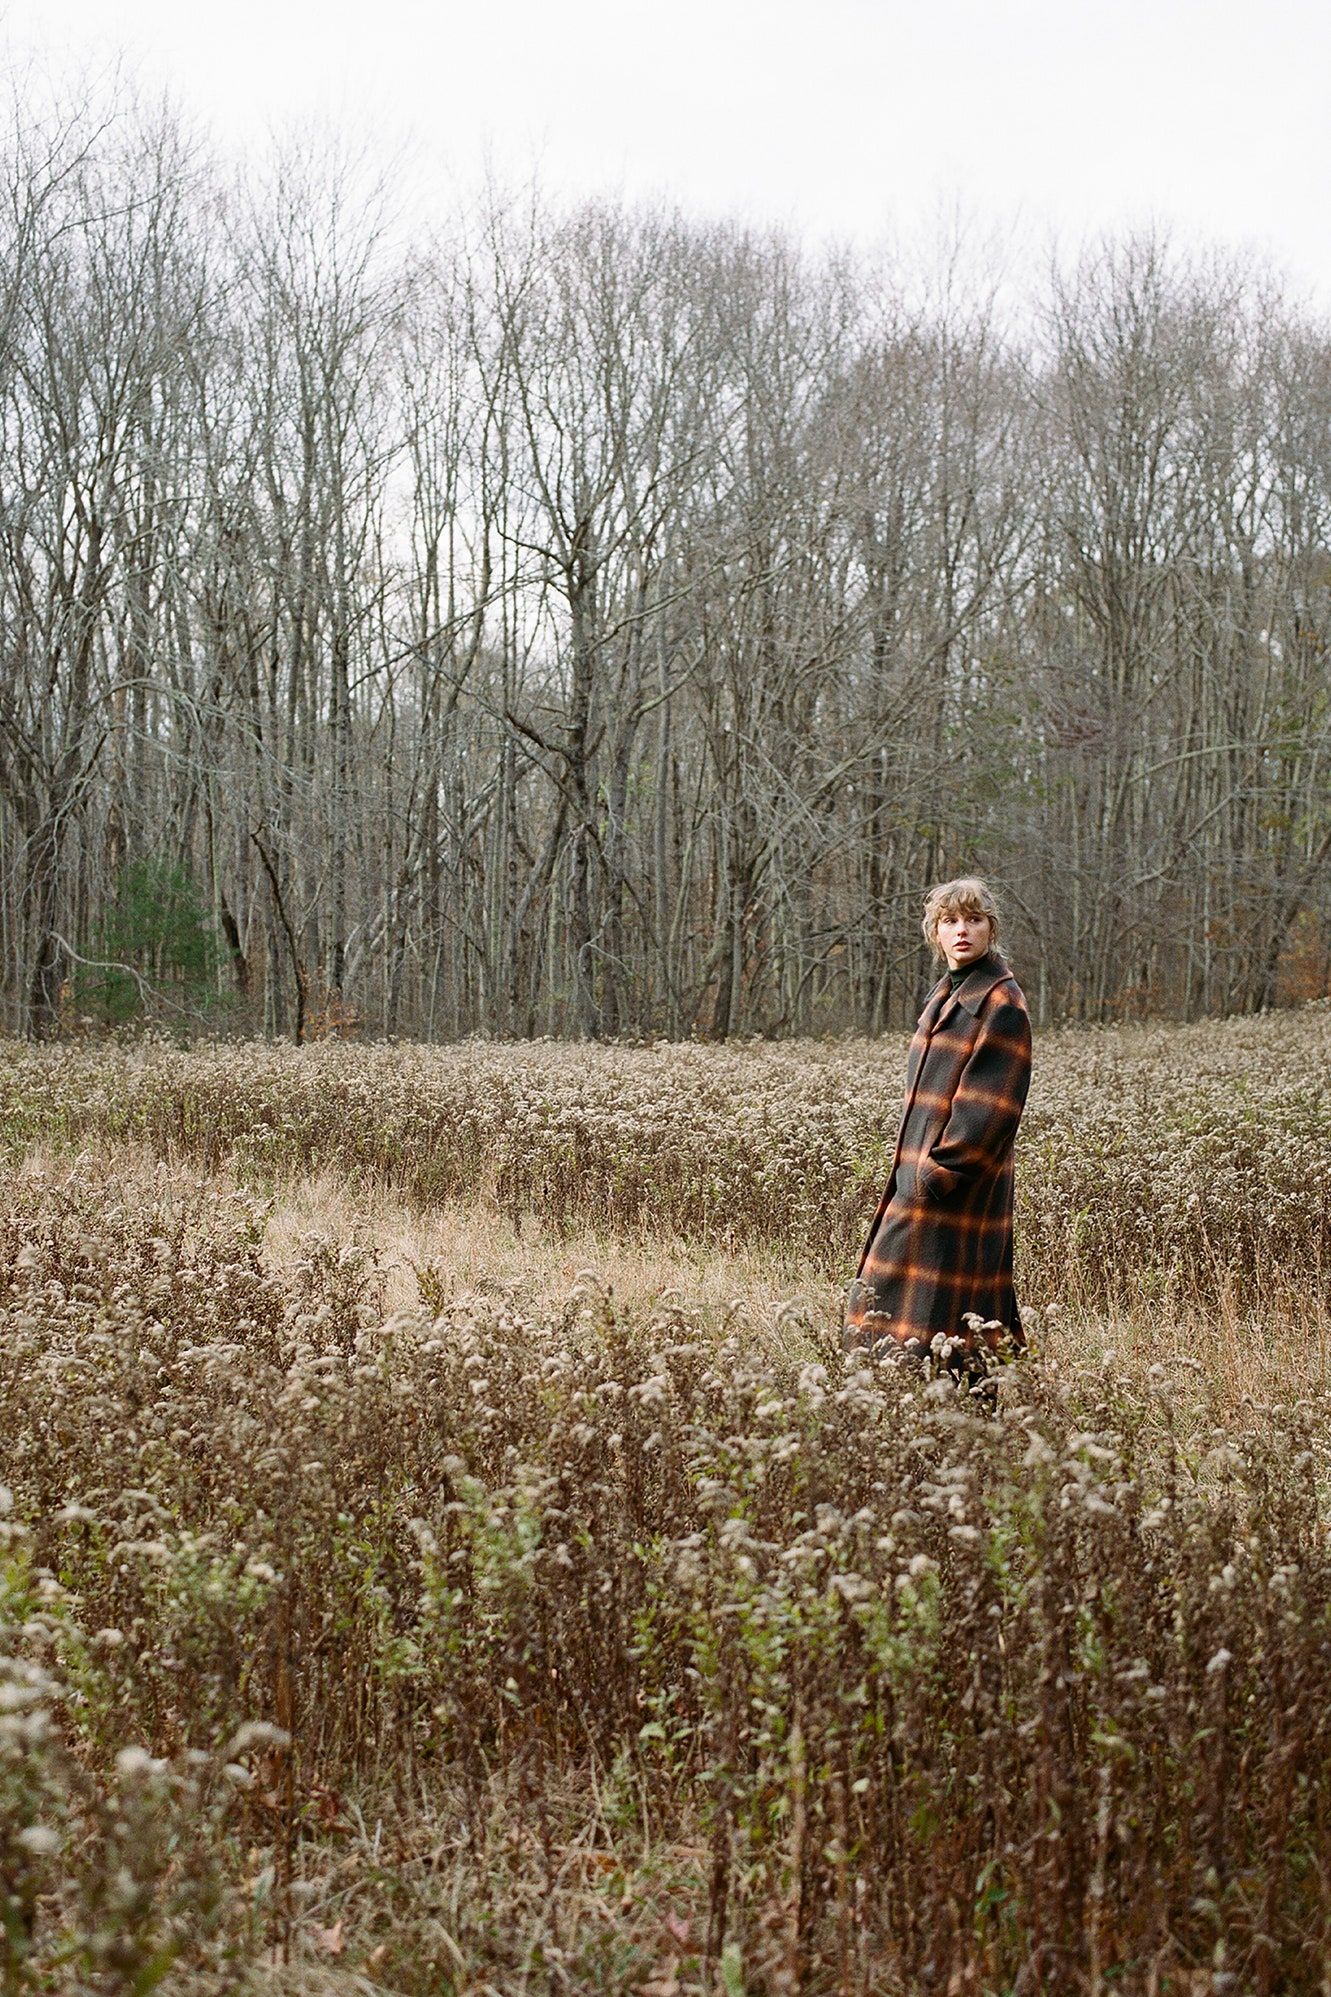 A man in plaid coat standing on grassy field - Taylor Swift